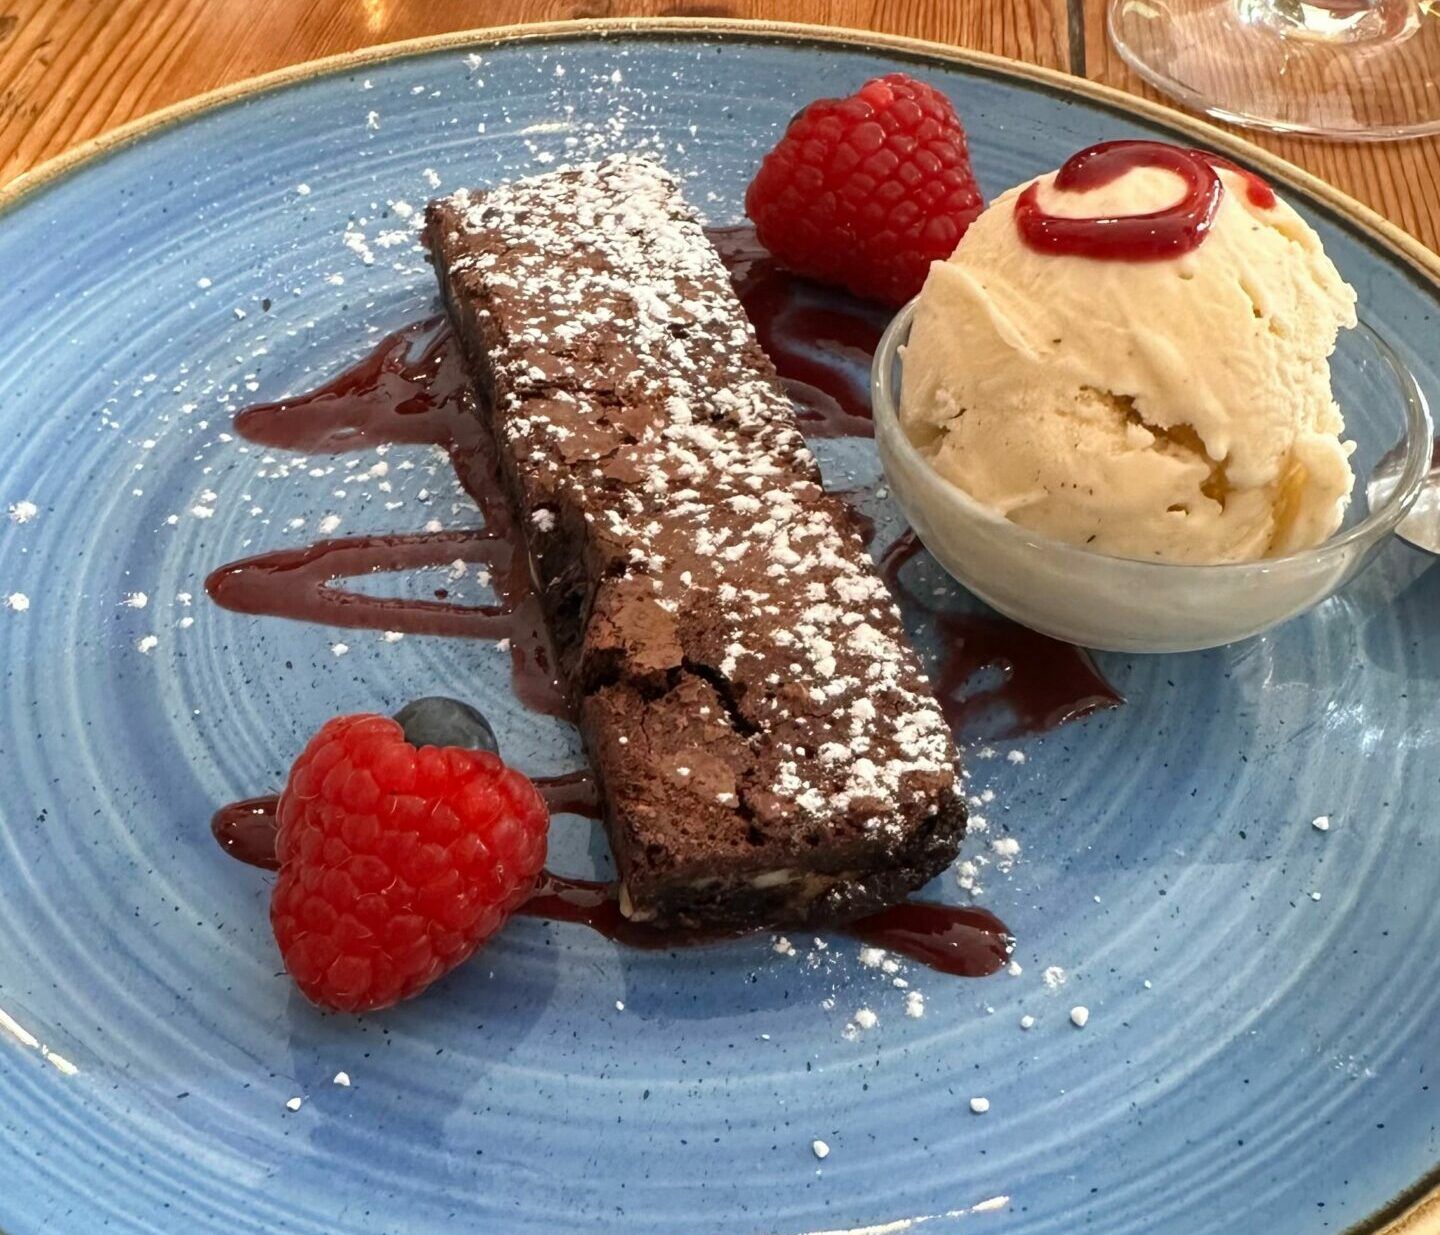 Chocolate brownie with two strawberries and ice cream served on blue plate